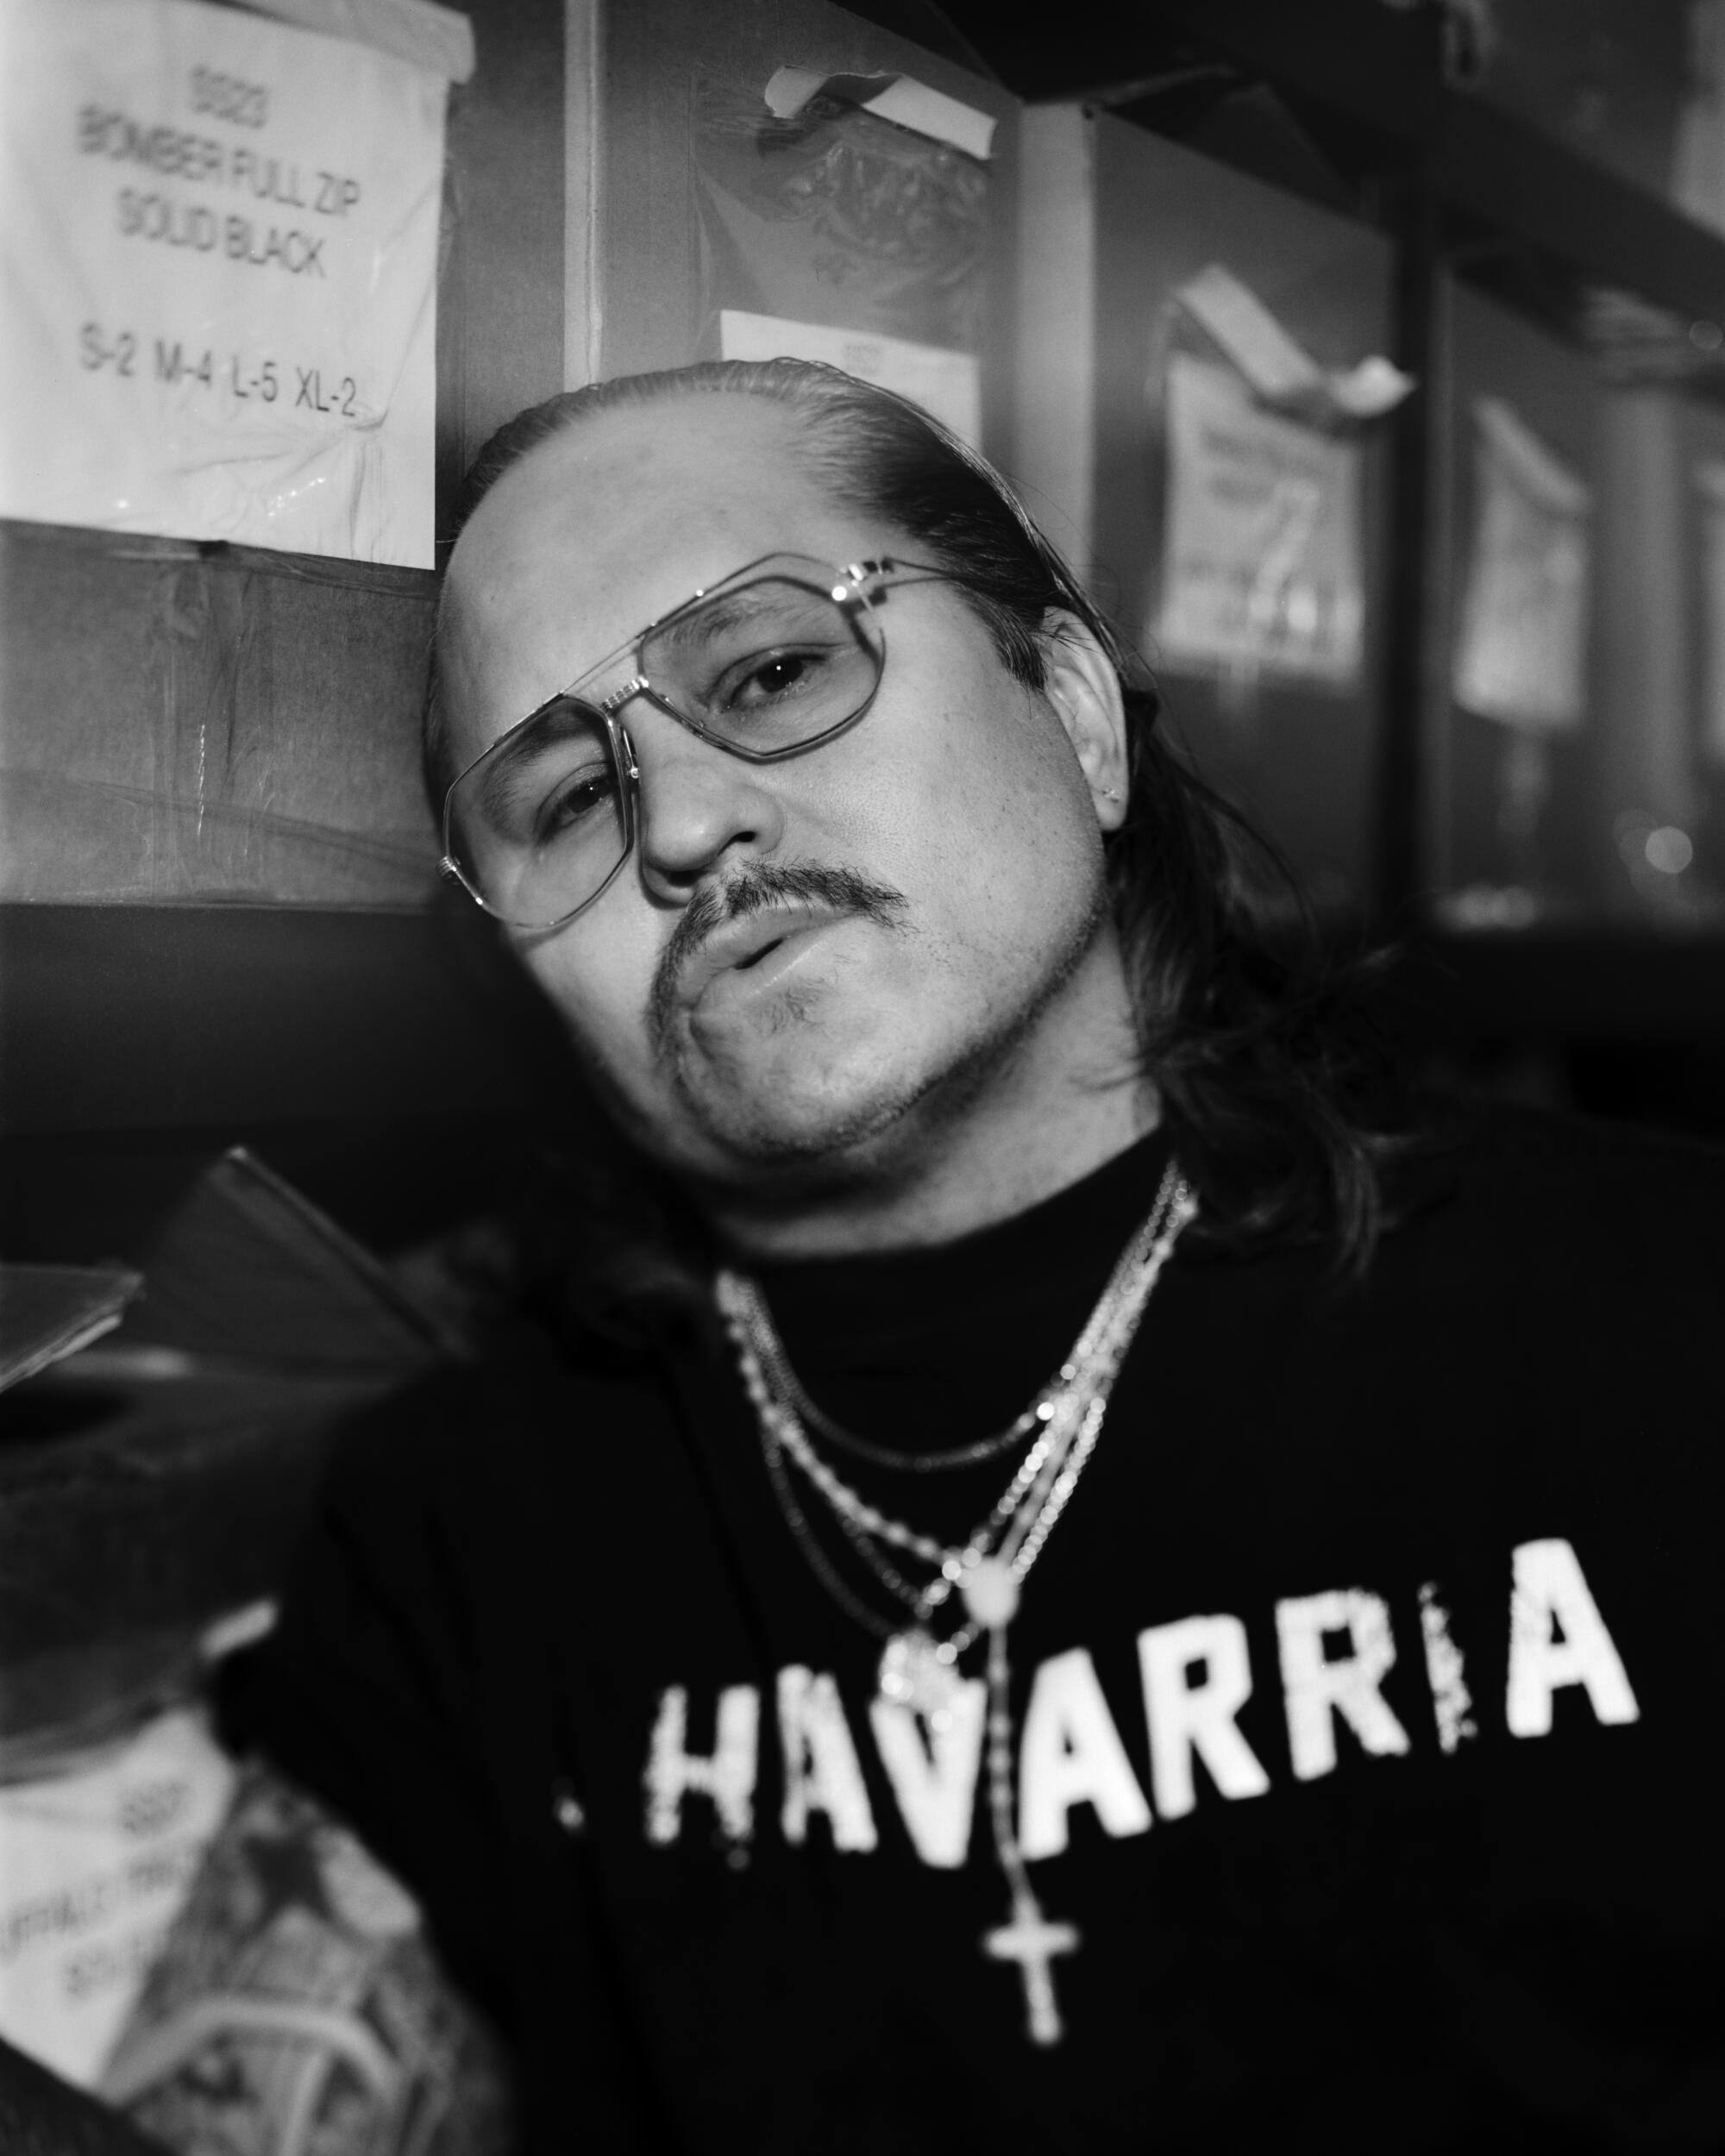 A man in a dark T-shirt with the word Chavarria on it, wearing several necklaces